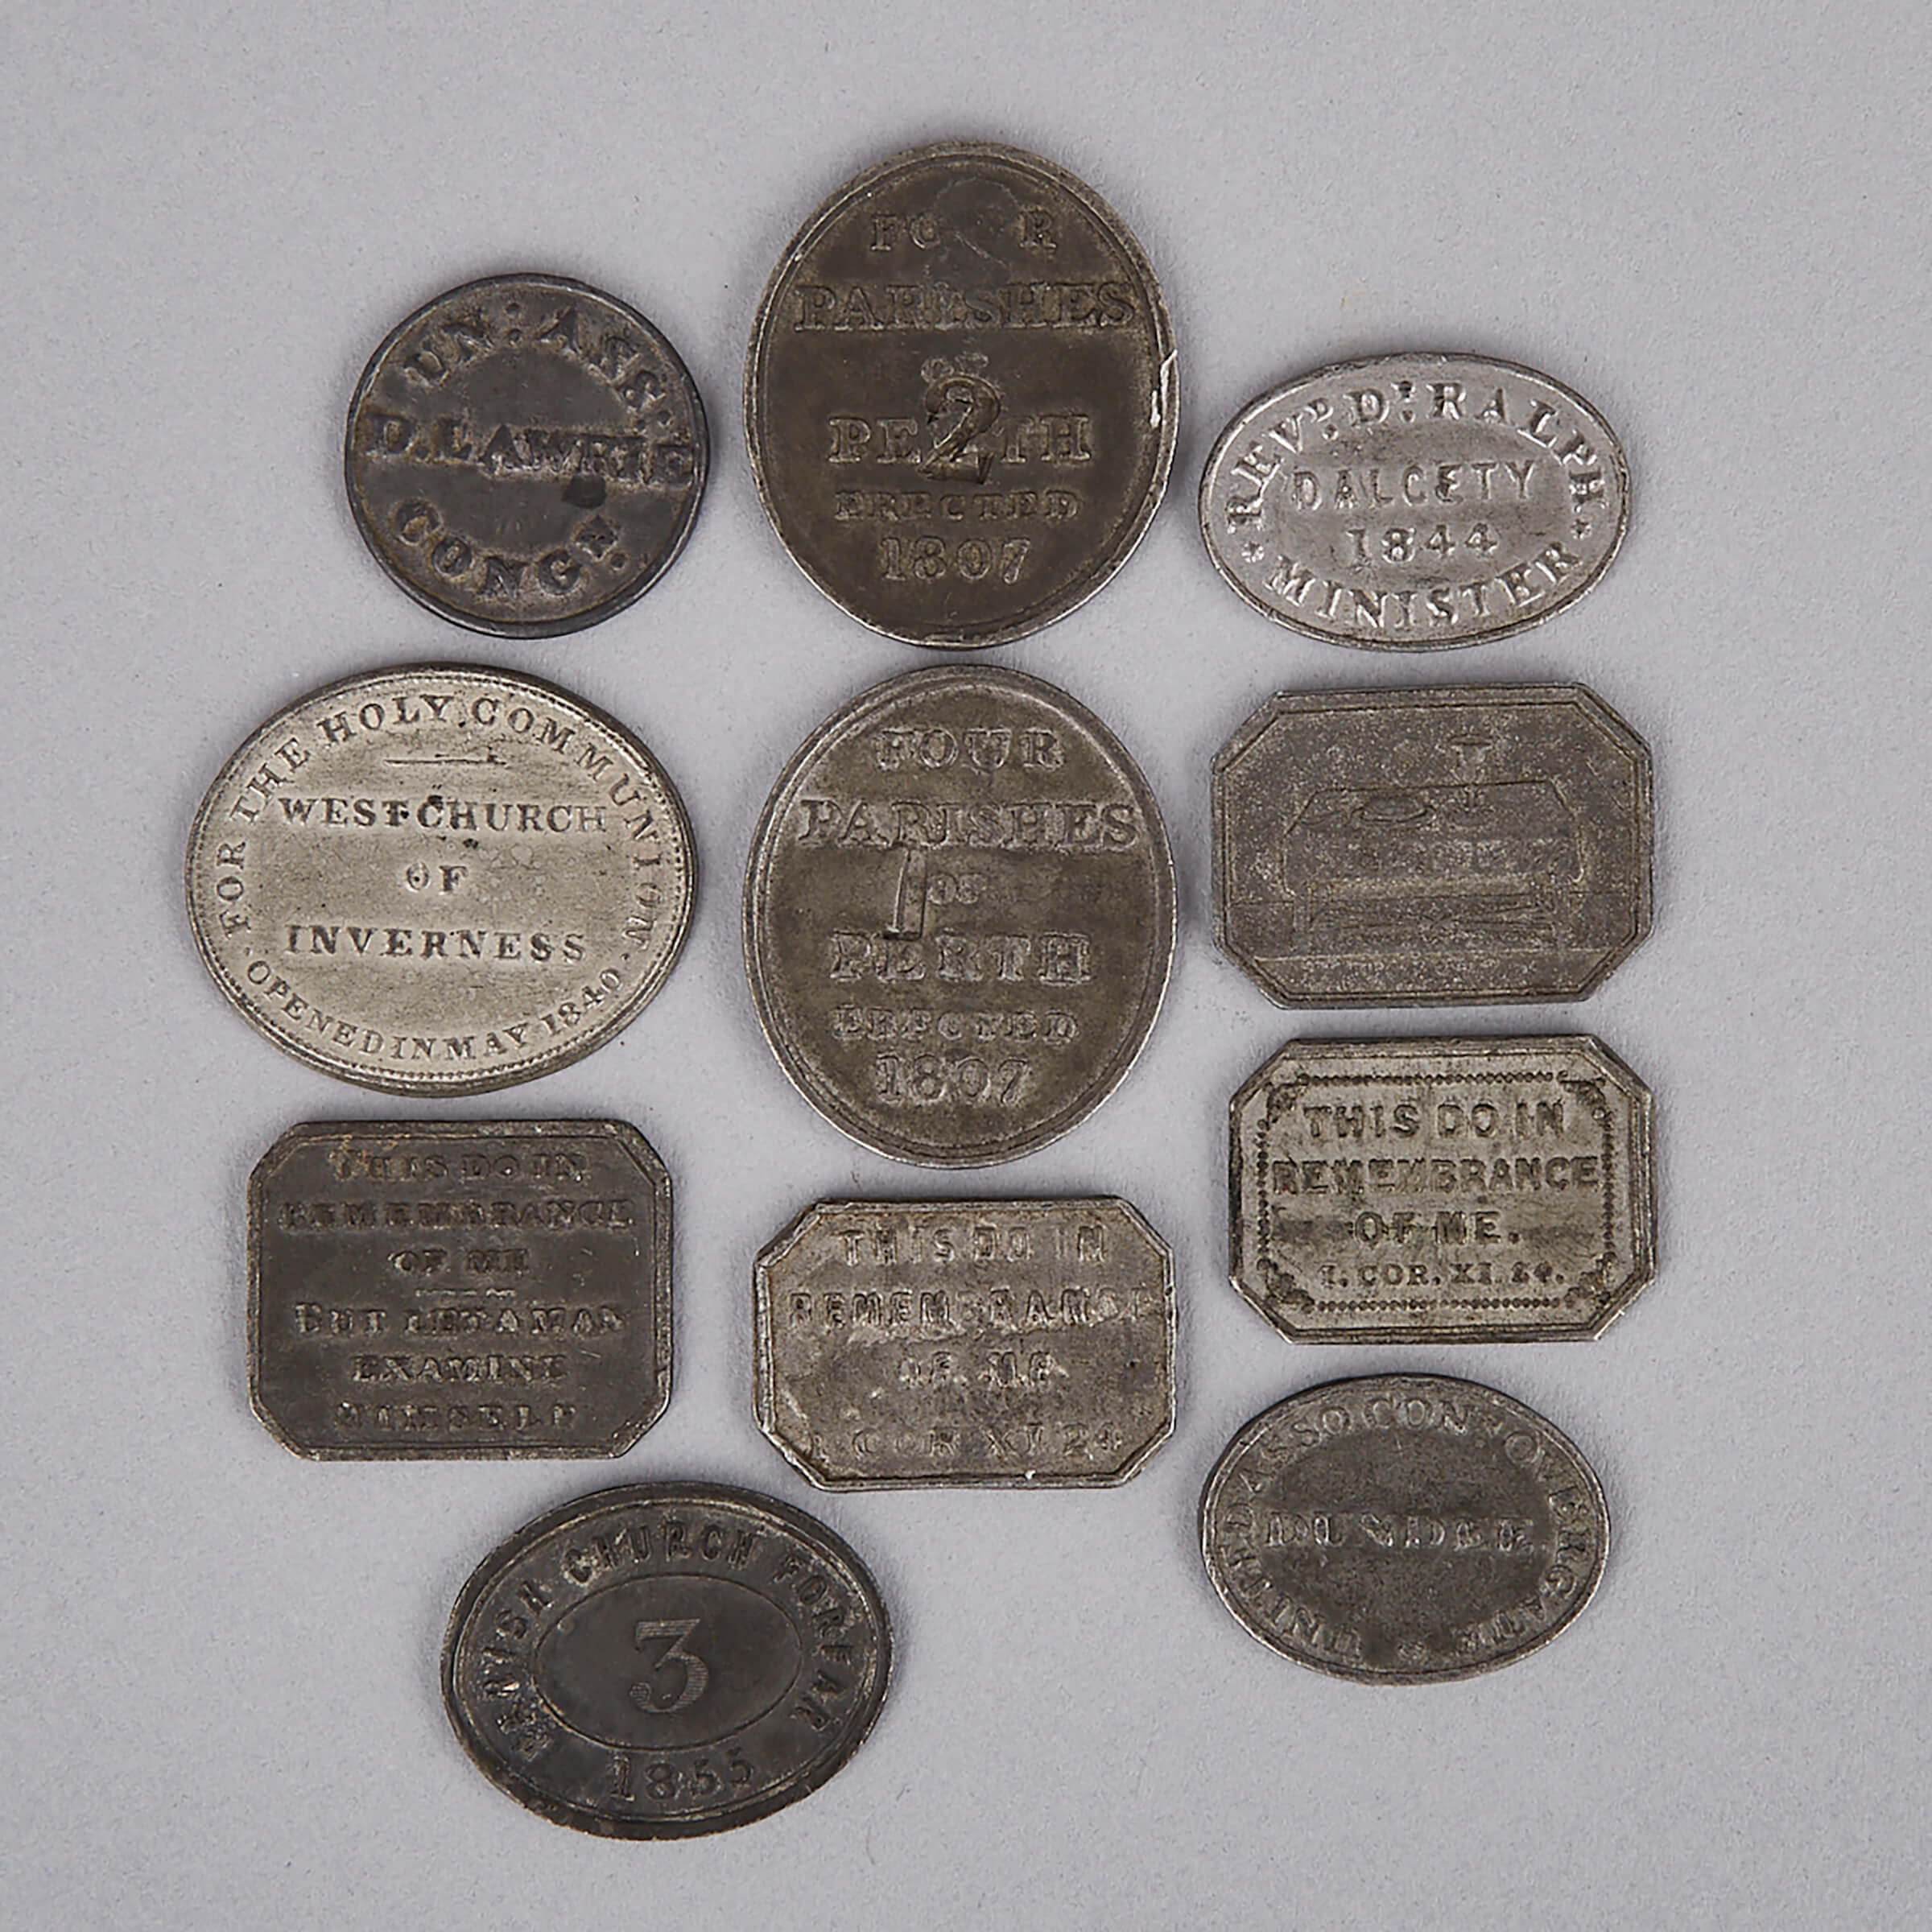 Collection of Eleven Scottish Pewter Communion Tokens, early-mid 19th century